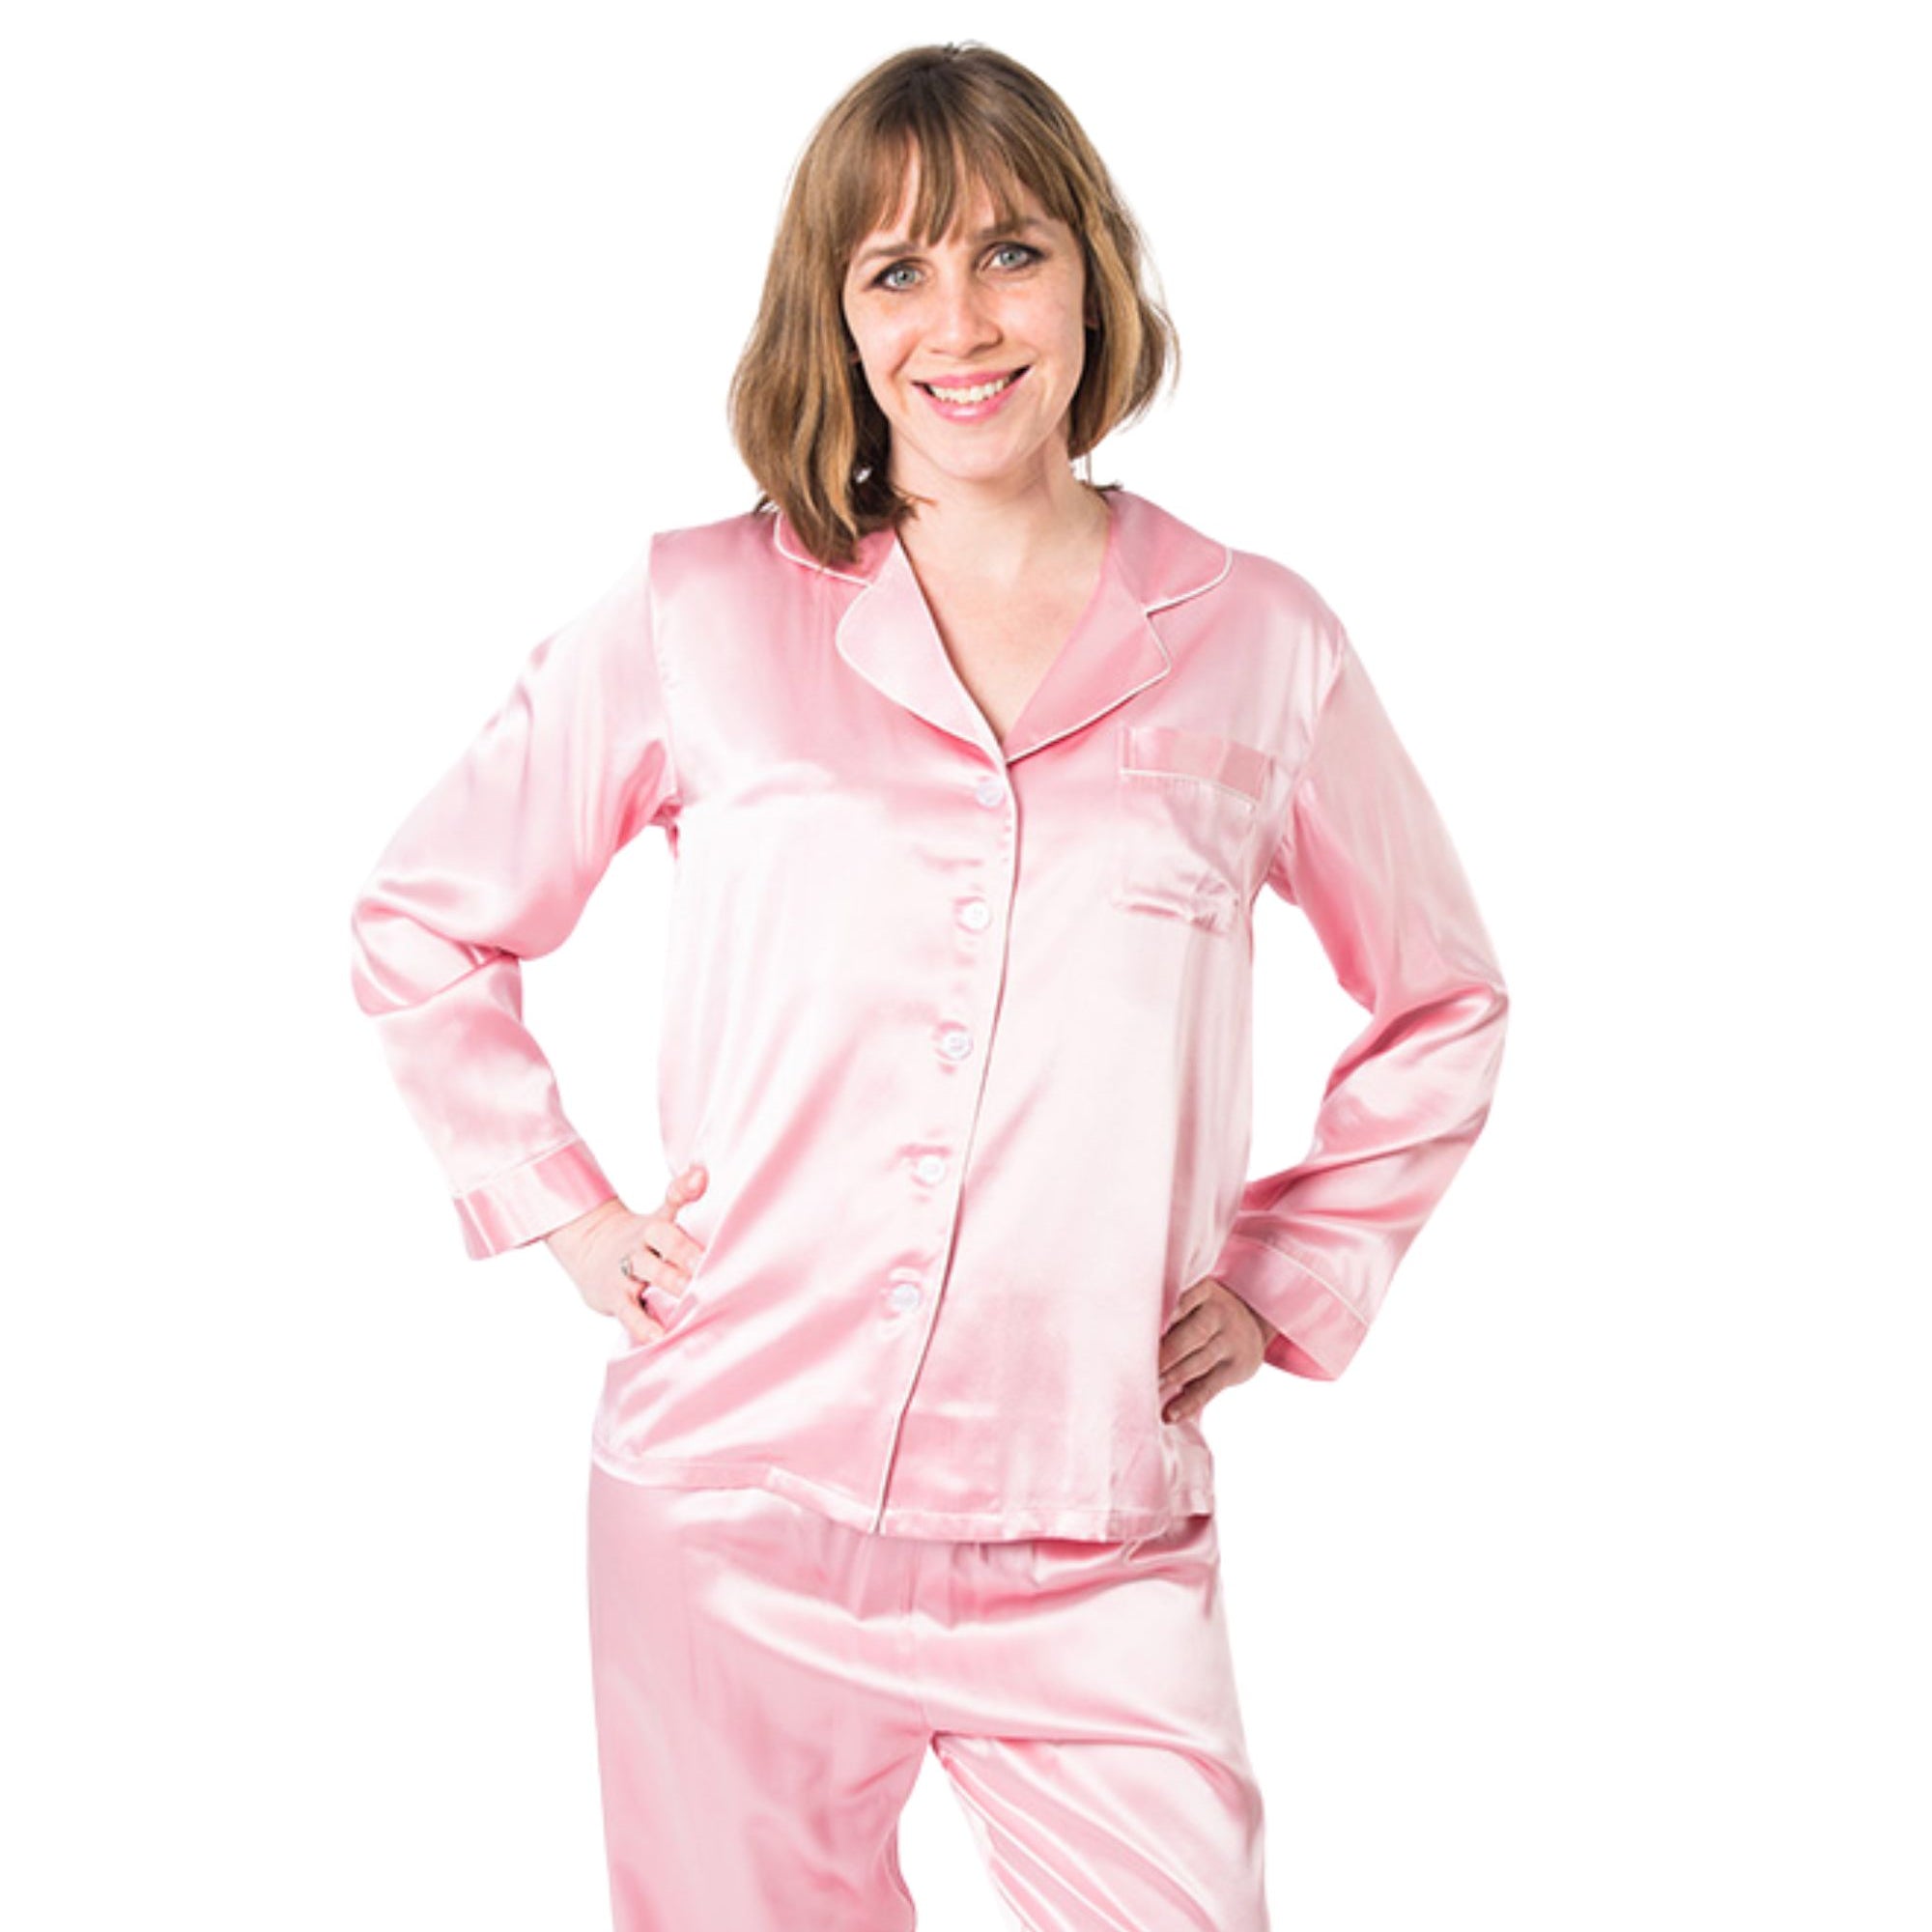  Women's Pink Pajama Set - Women's Pink Pajama Set -  -  - Luxurious Fine Silk by Forsters Finery